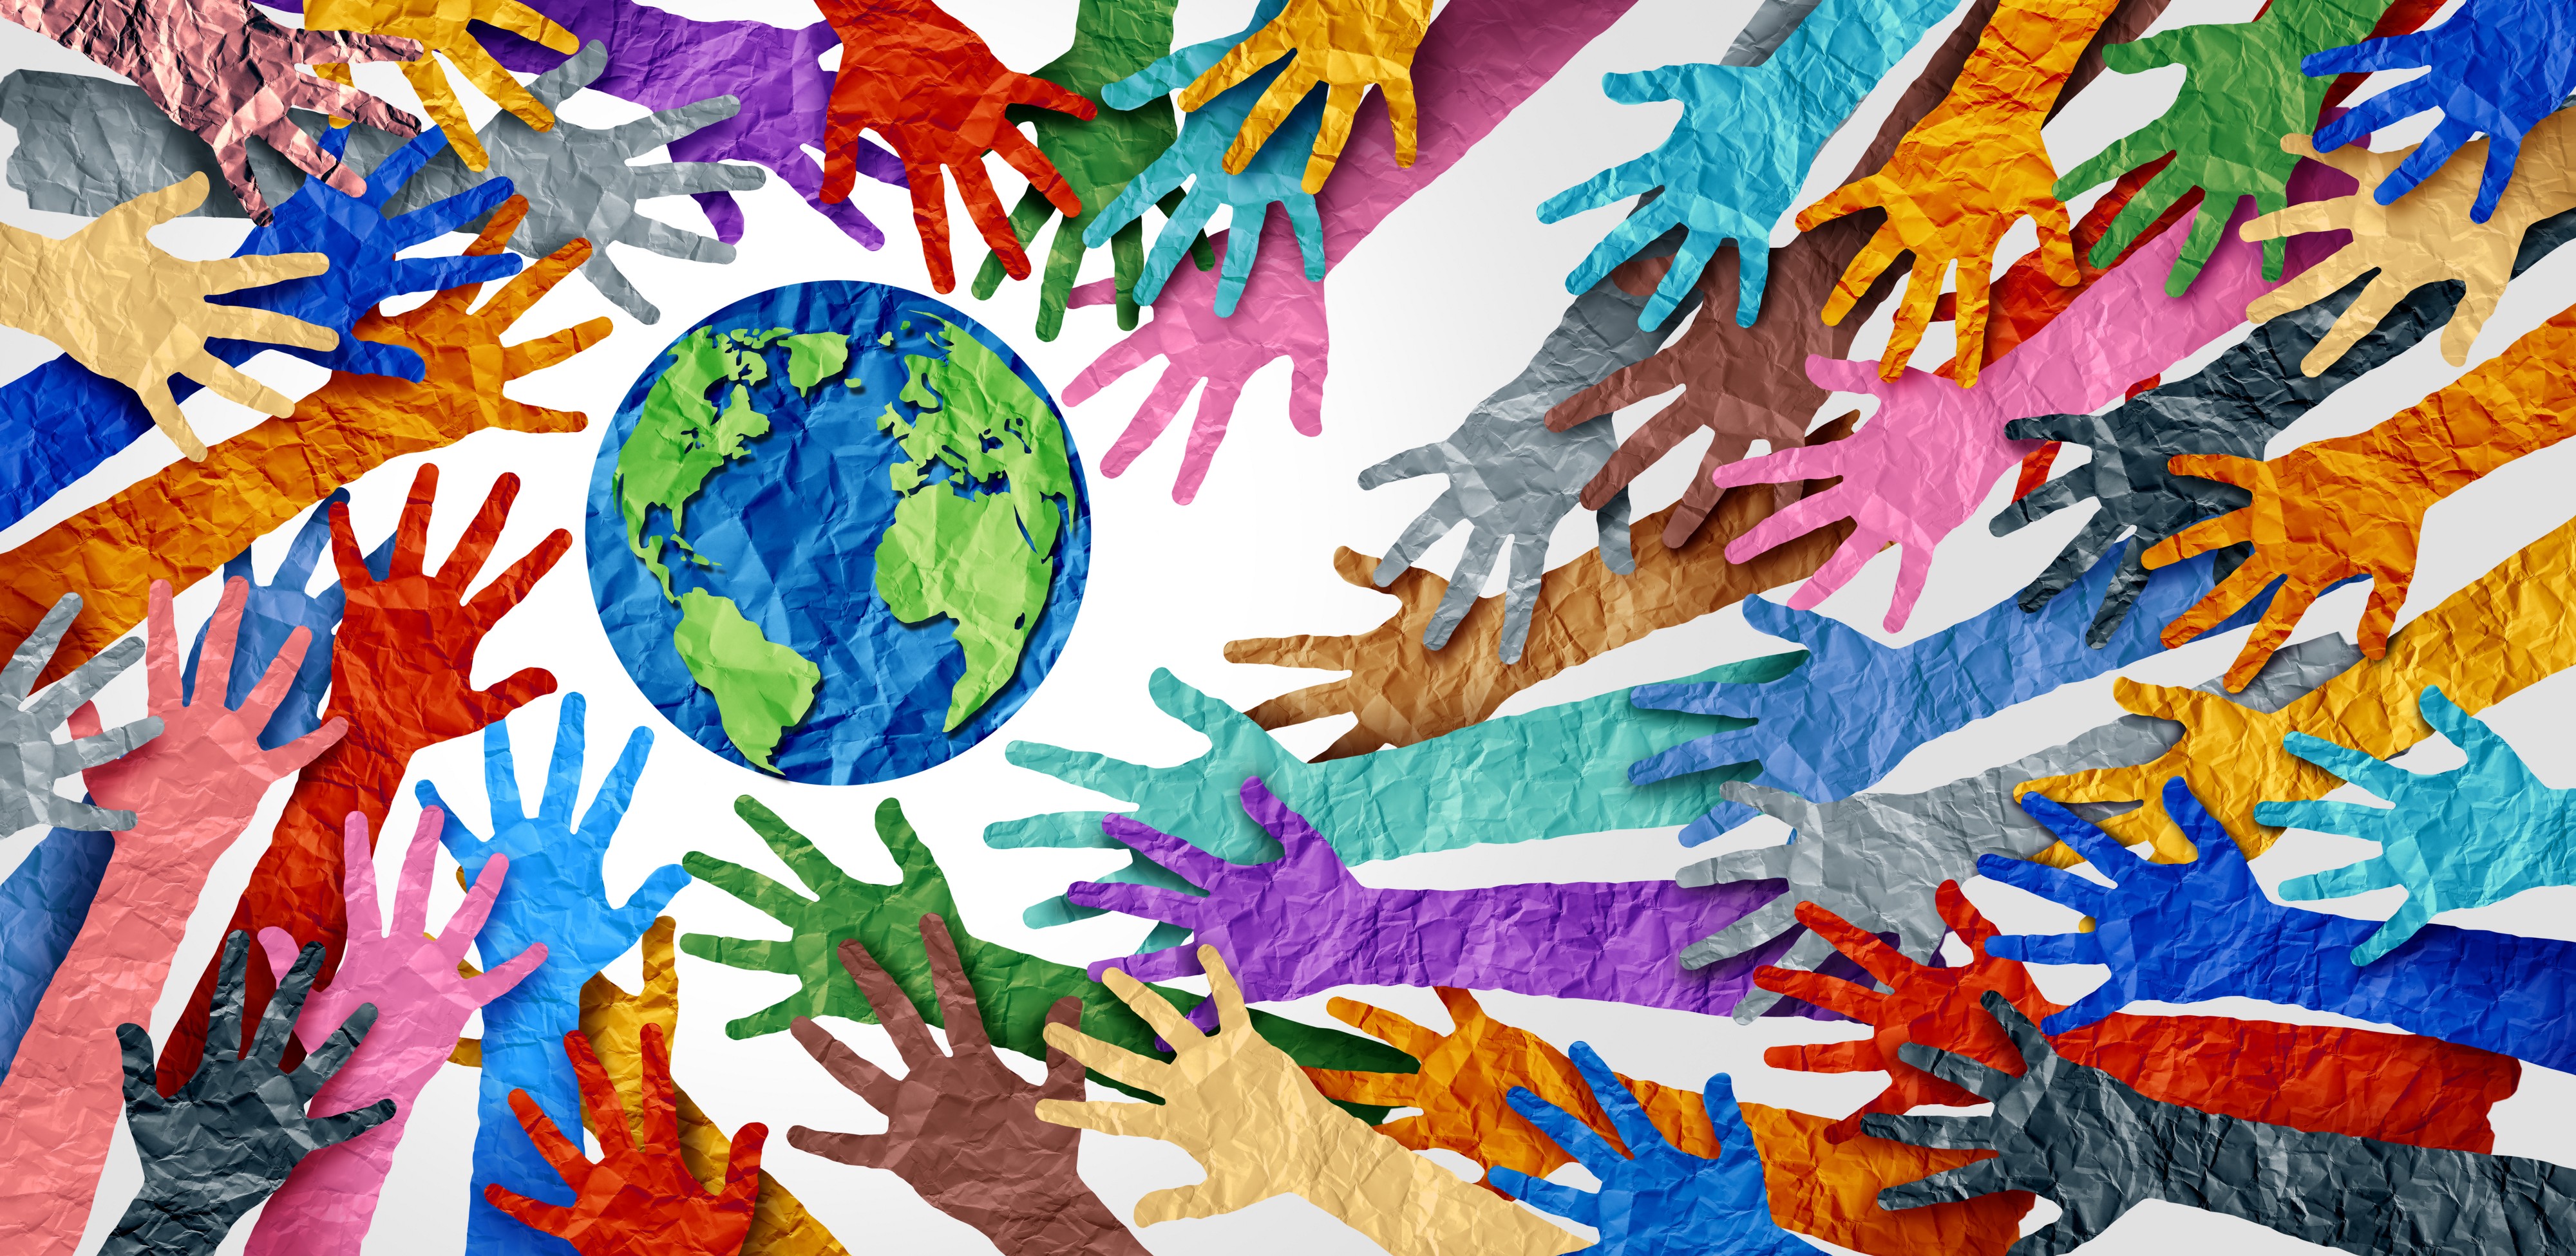 multi-colored cut out crumpled paper hands reaching towards a graphic of the earth which is also made with crumpled then smoothed out paper. Blue earth with green continents.